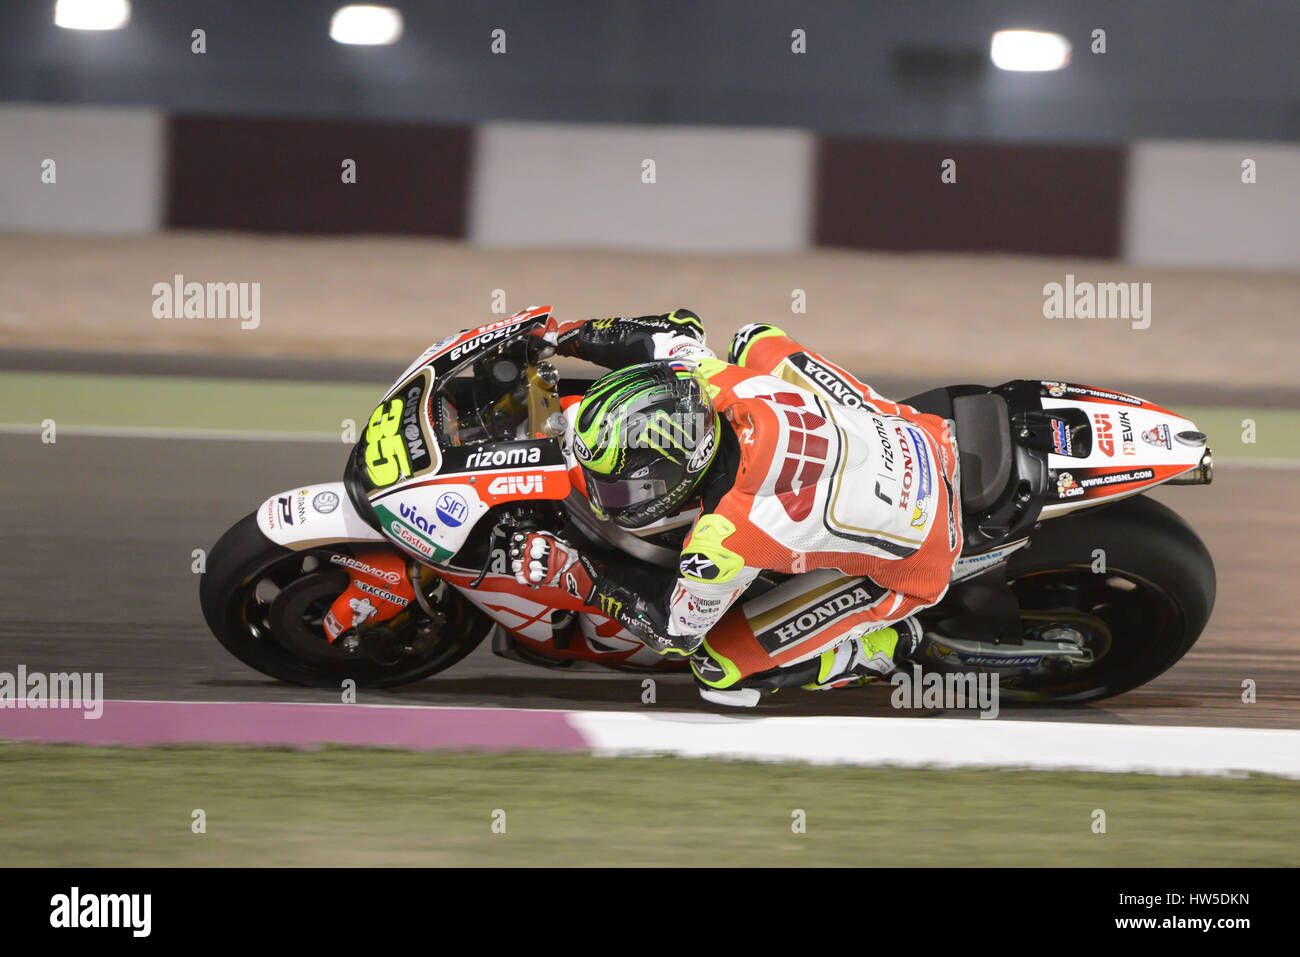 12th March 2017, Losail Circuit.  Qatar Cal Crutchlow who rides for LCR Honda during the final day of the Qatar MotoGP winter test at Losail Internati Stock Photo